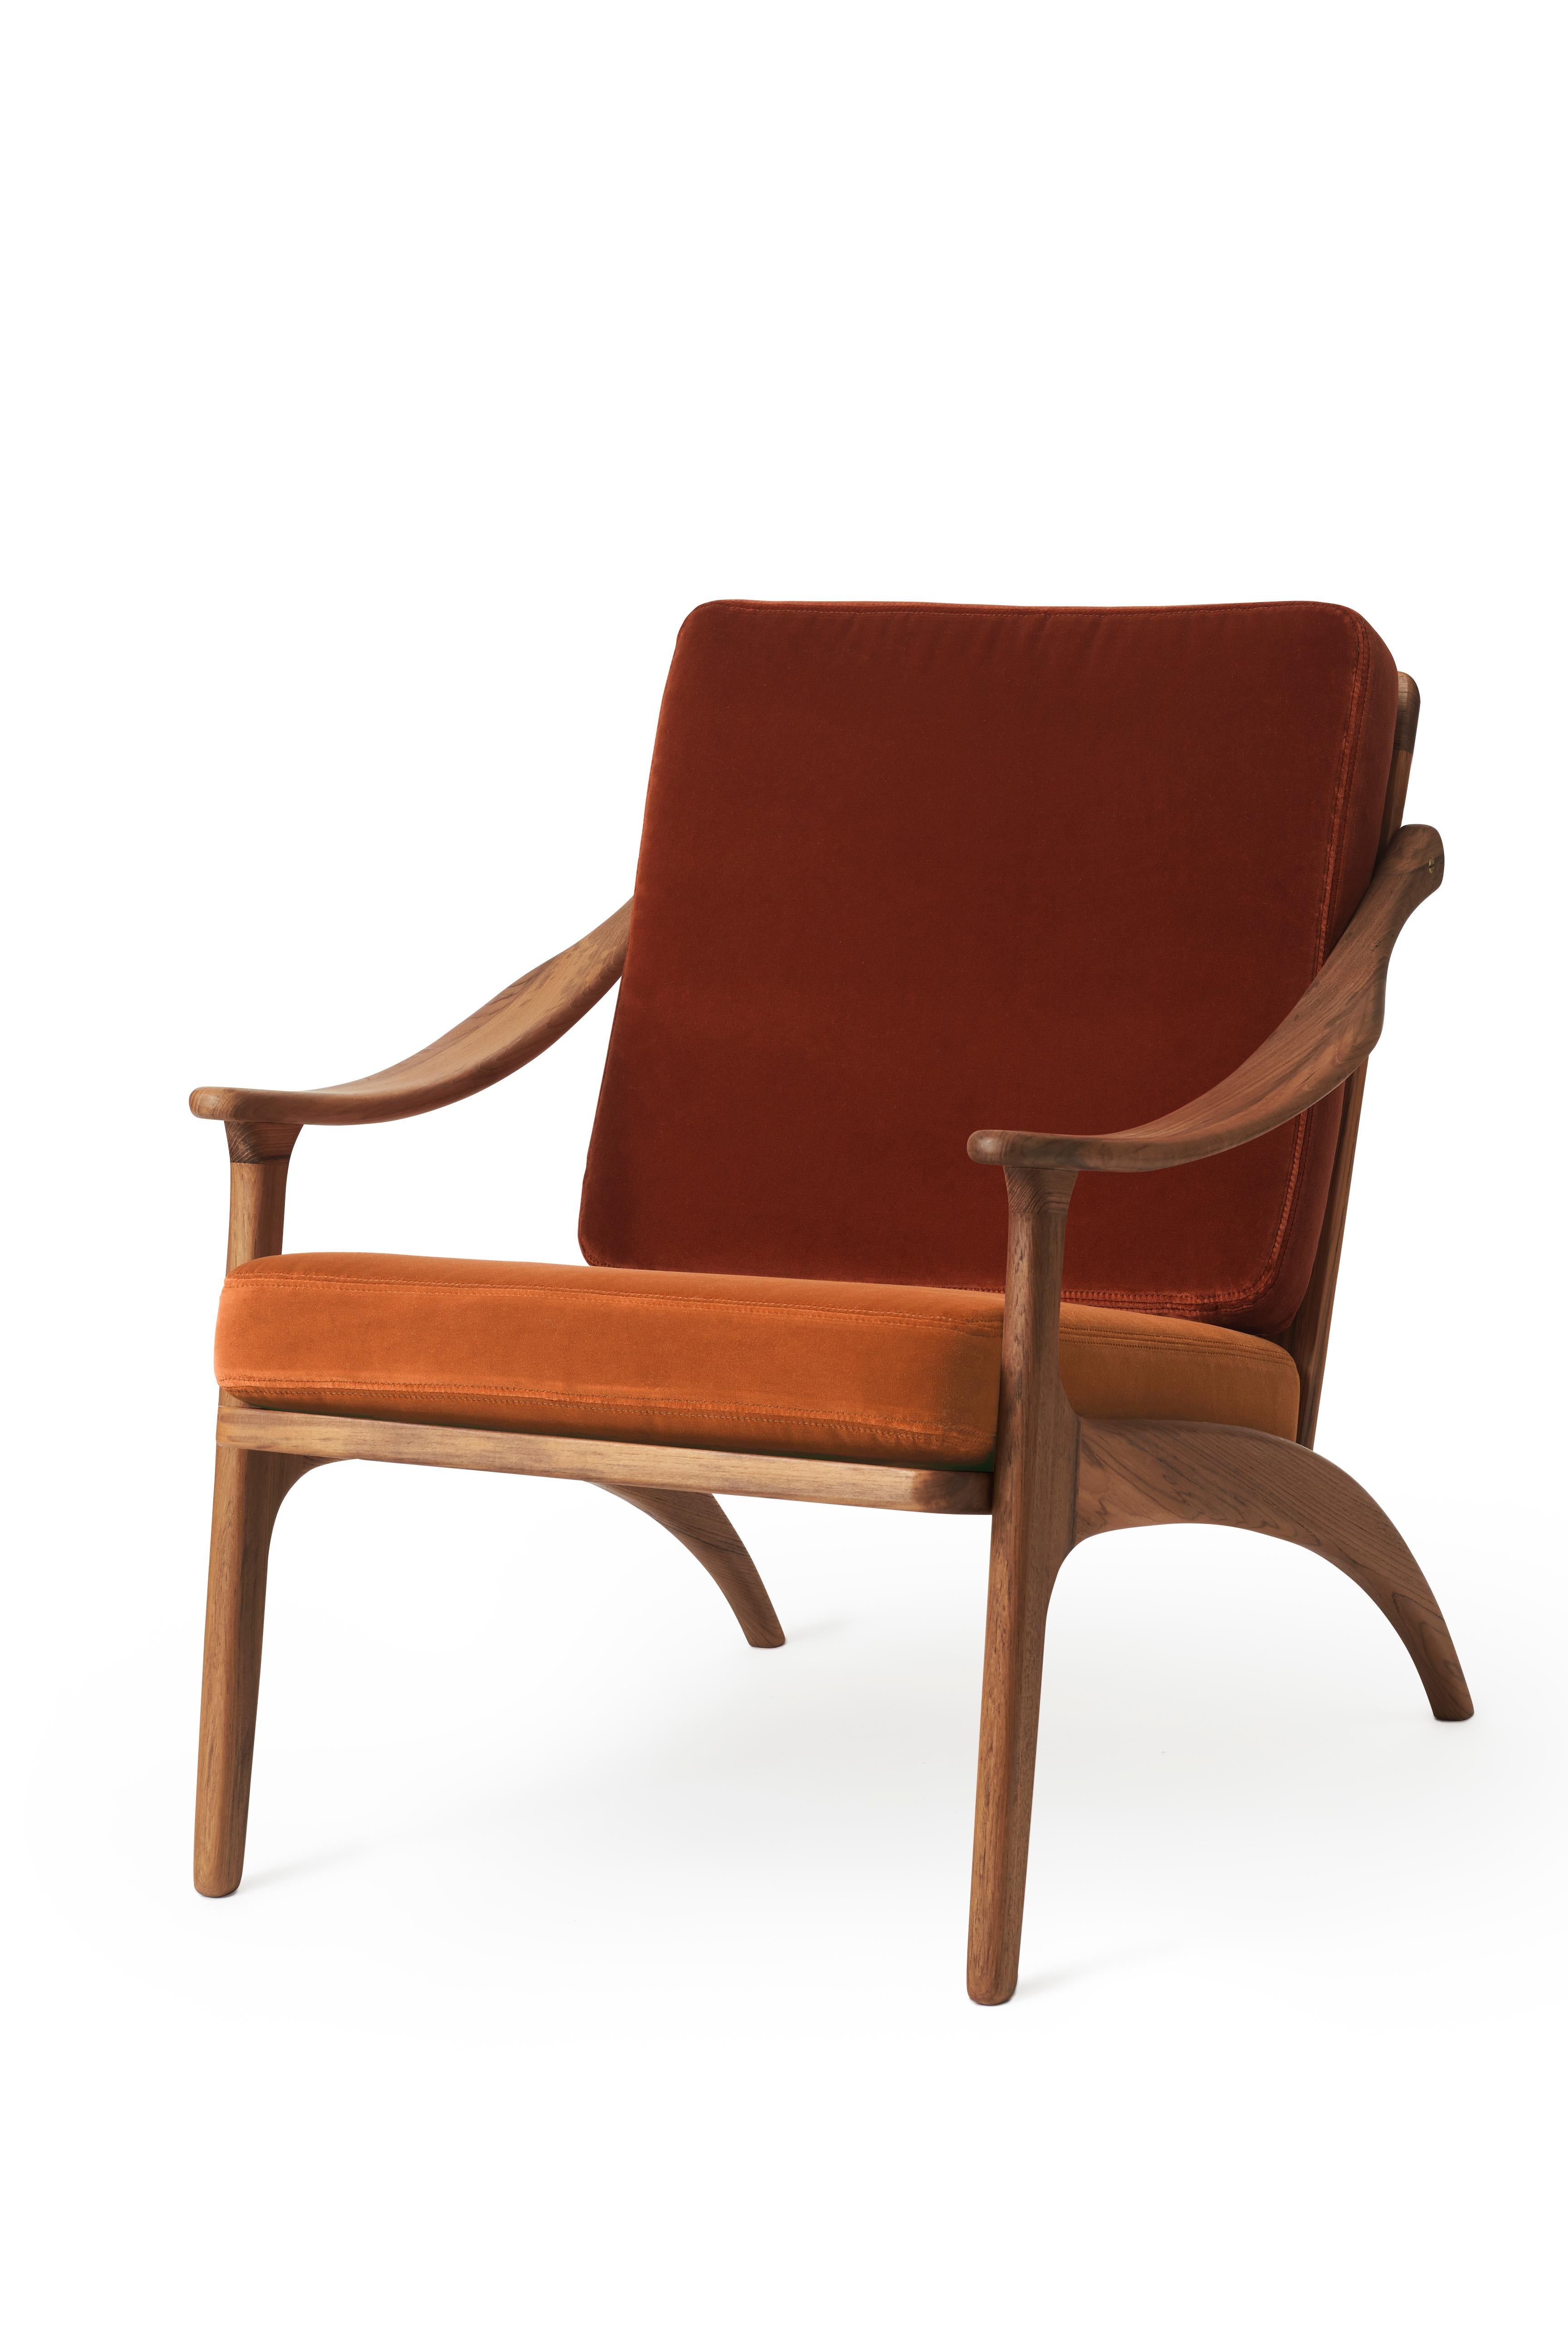 For Sale: Red (Ritz 3701,8008) Lean Back Lounge Two-Tone Chair in Teak, by Arne Hovmand-Olsen from Warm Nordic